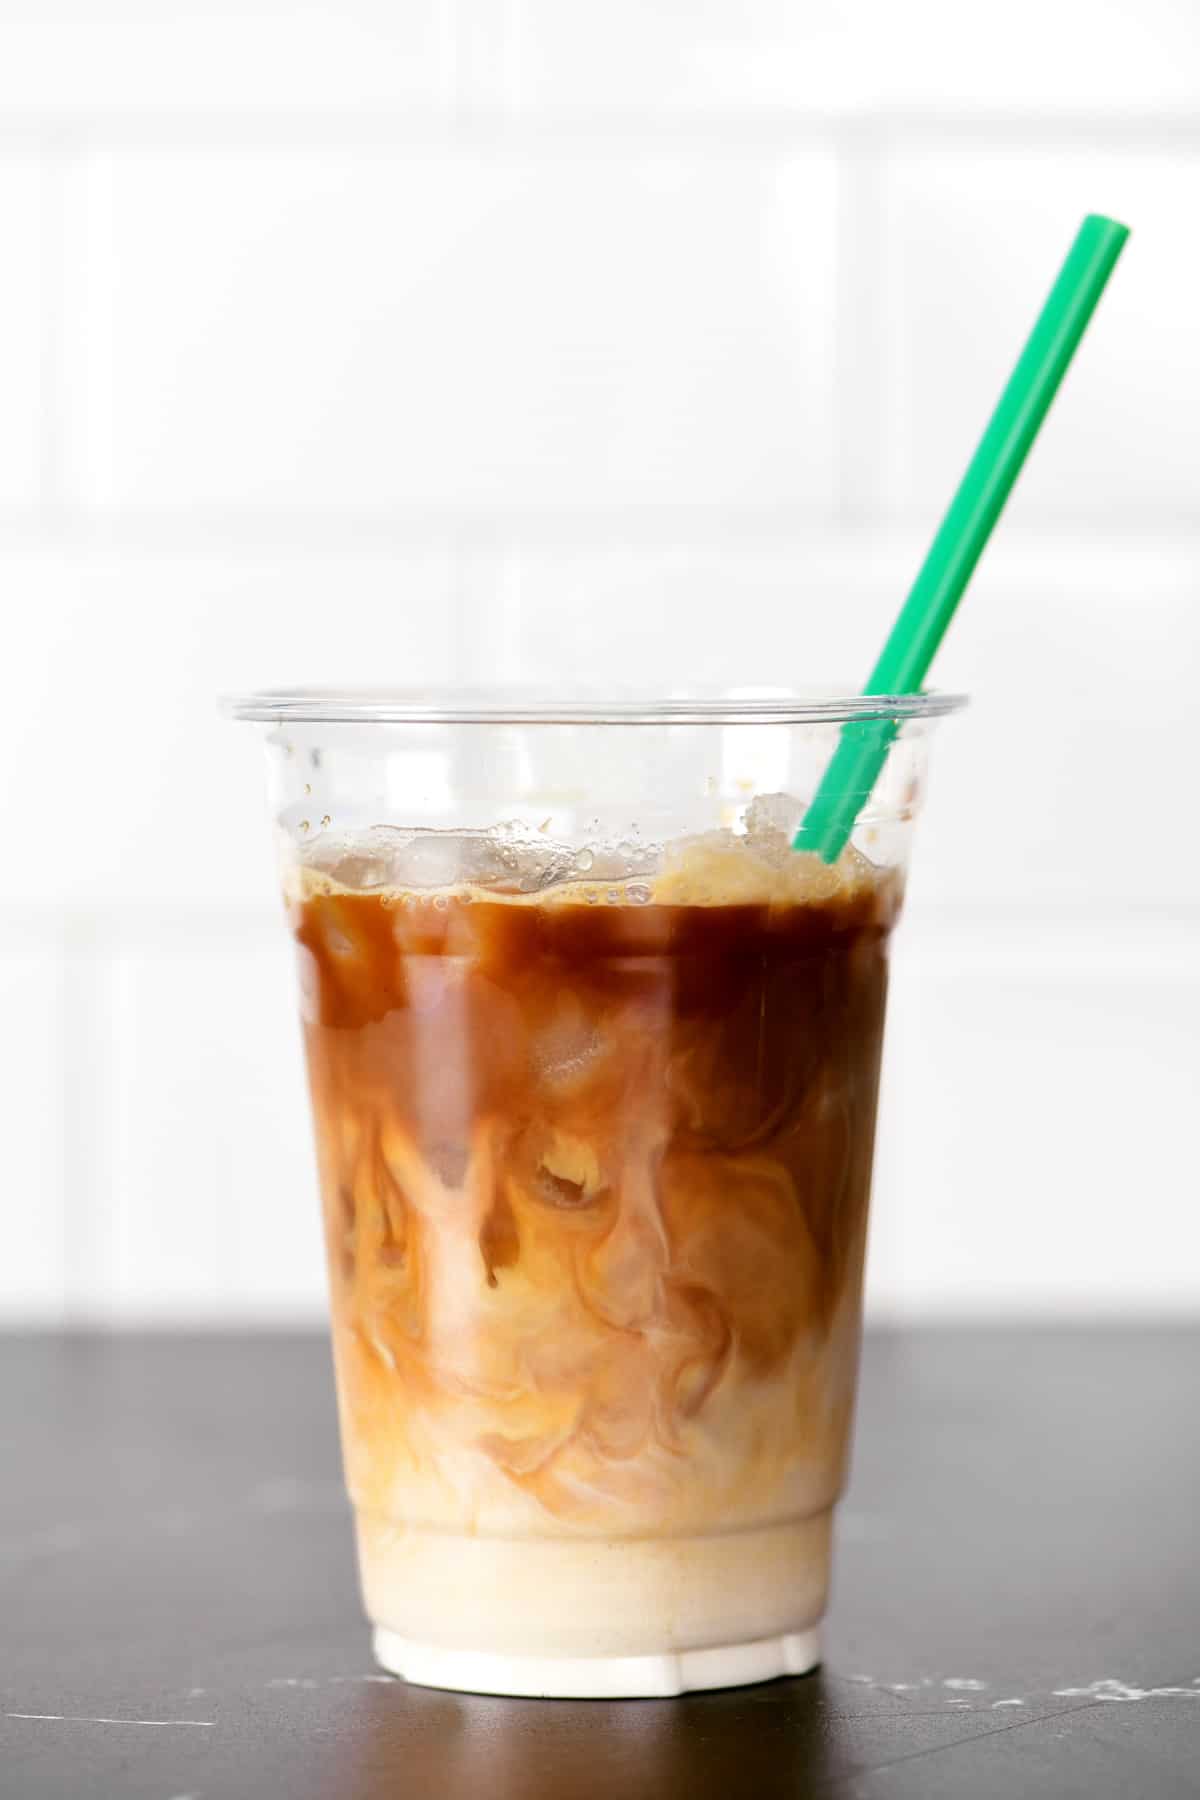 How to Make Perfect Iced Coffee at Home With a Keurig